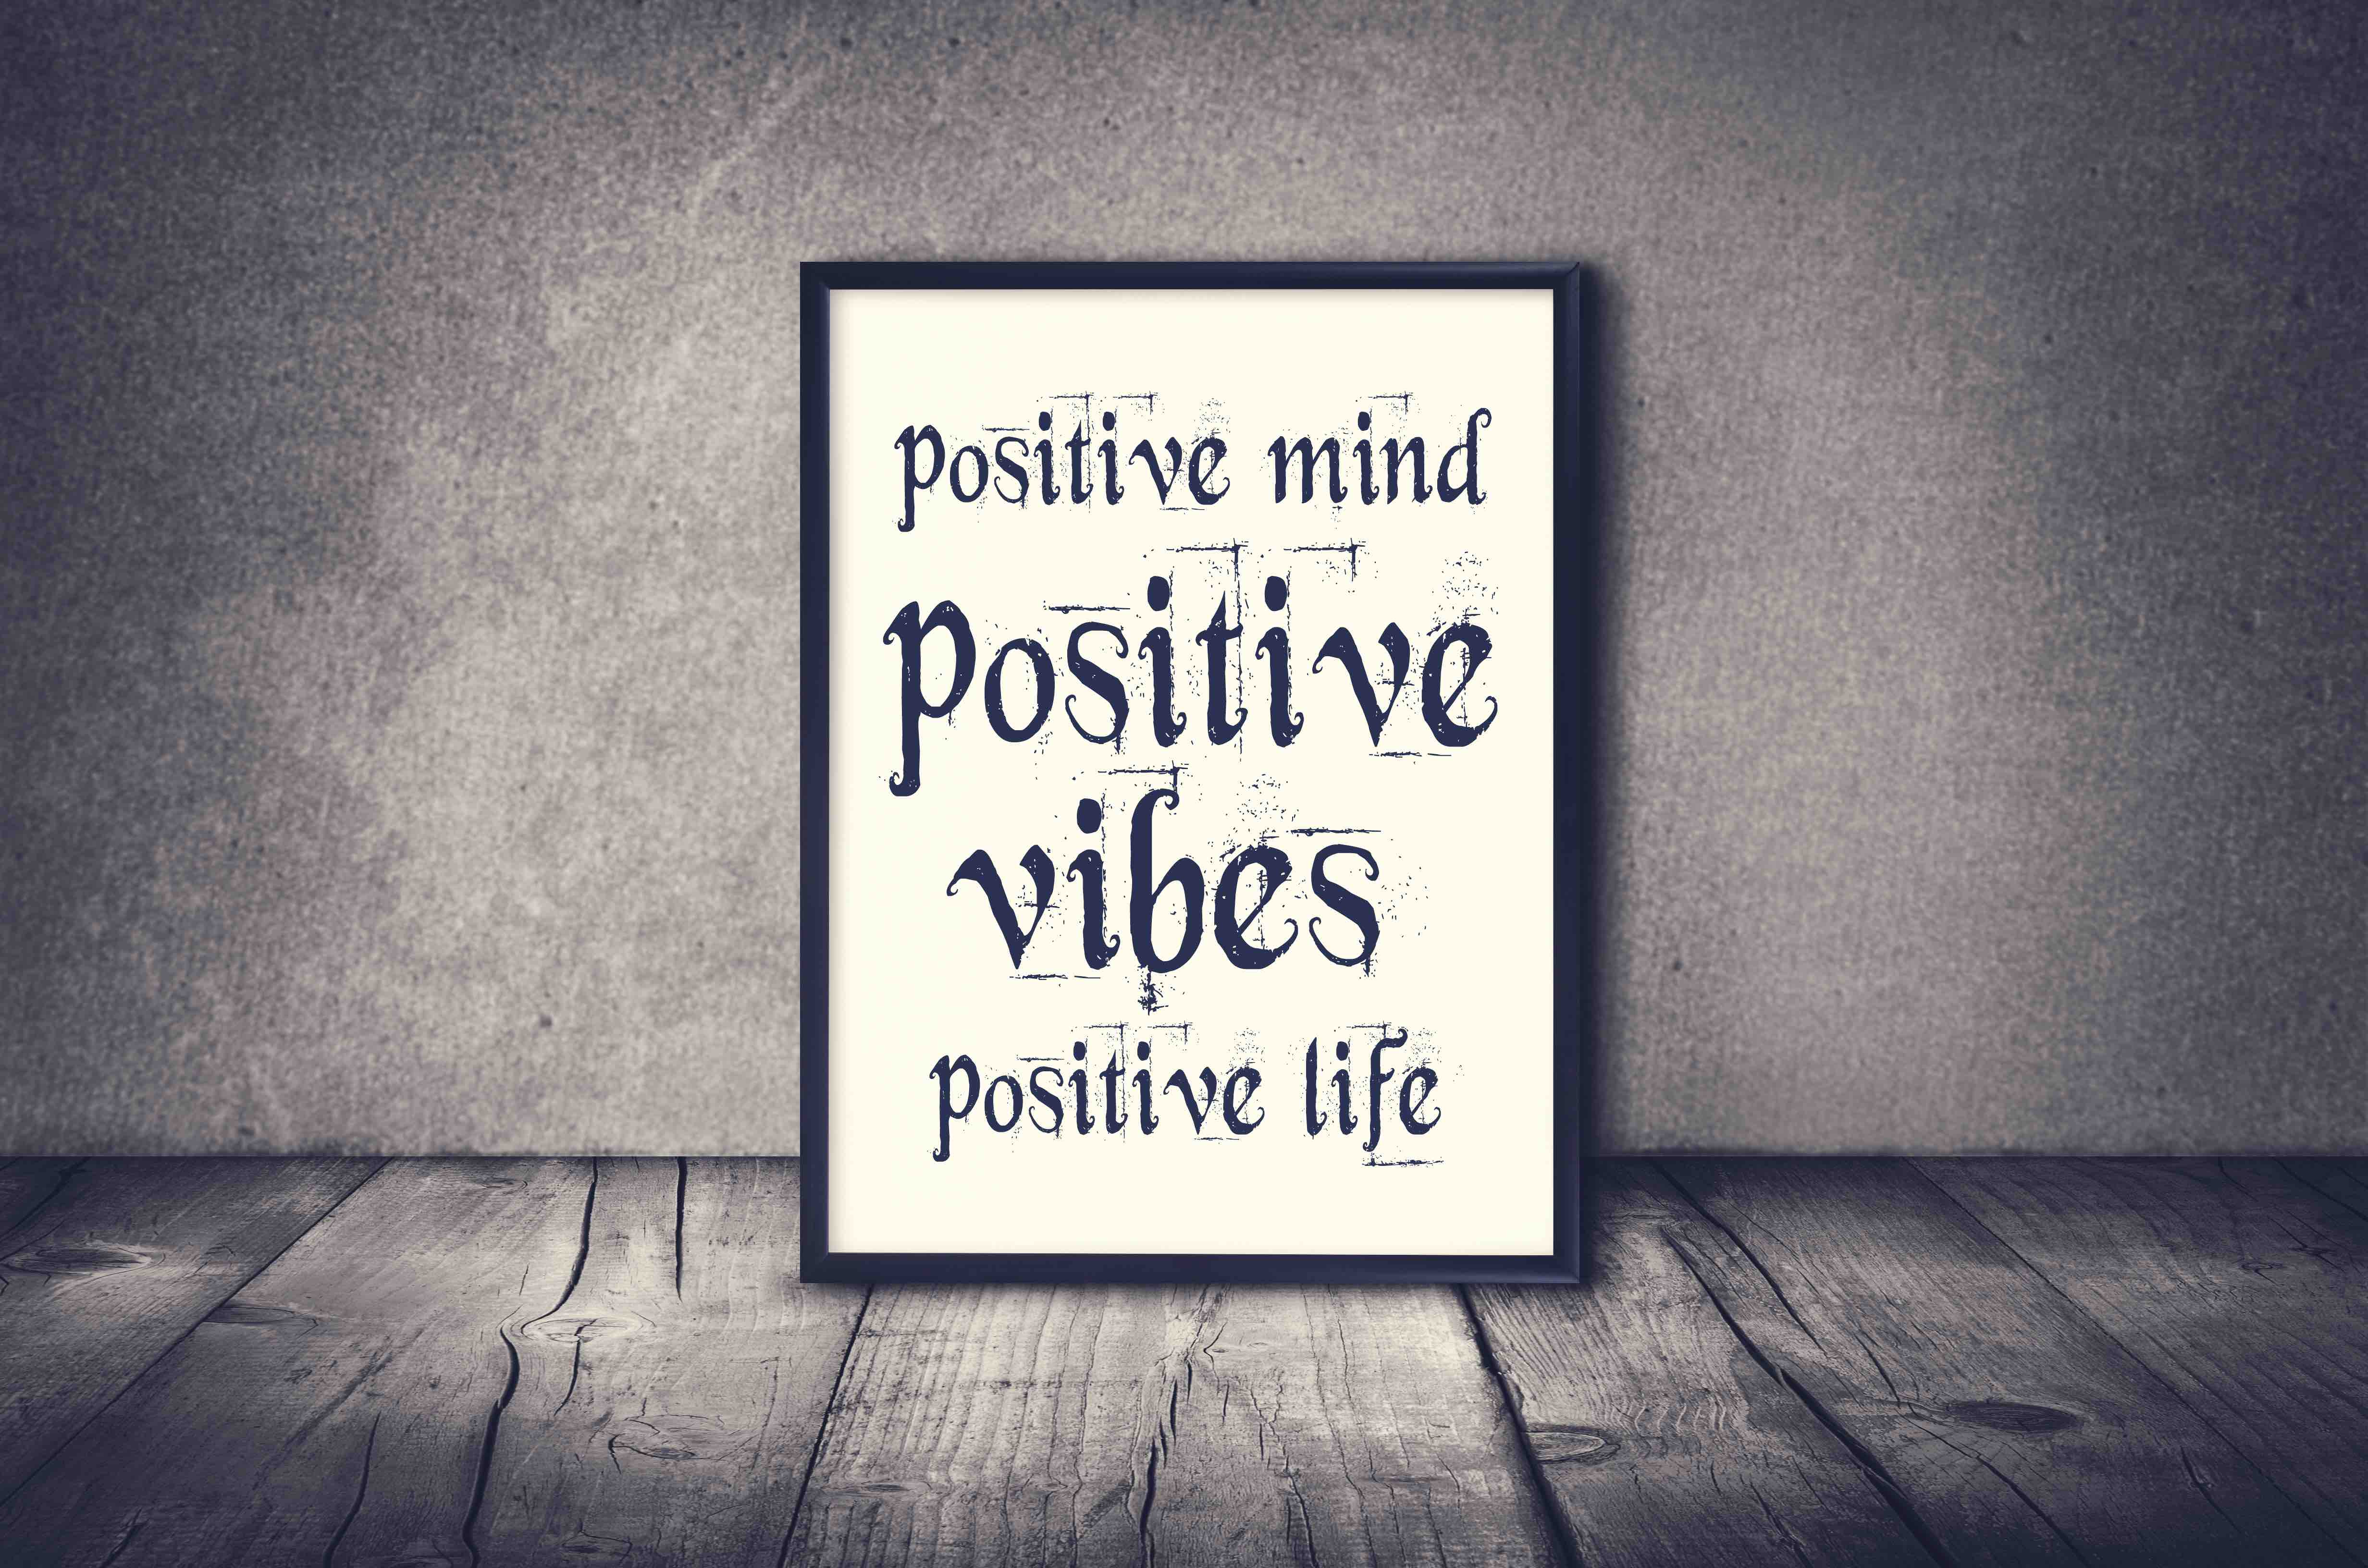 Positive mind, vibes, life inspirational quote. Inspirational quote and motivational background.